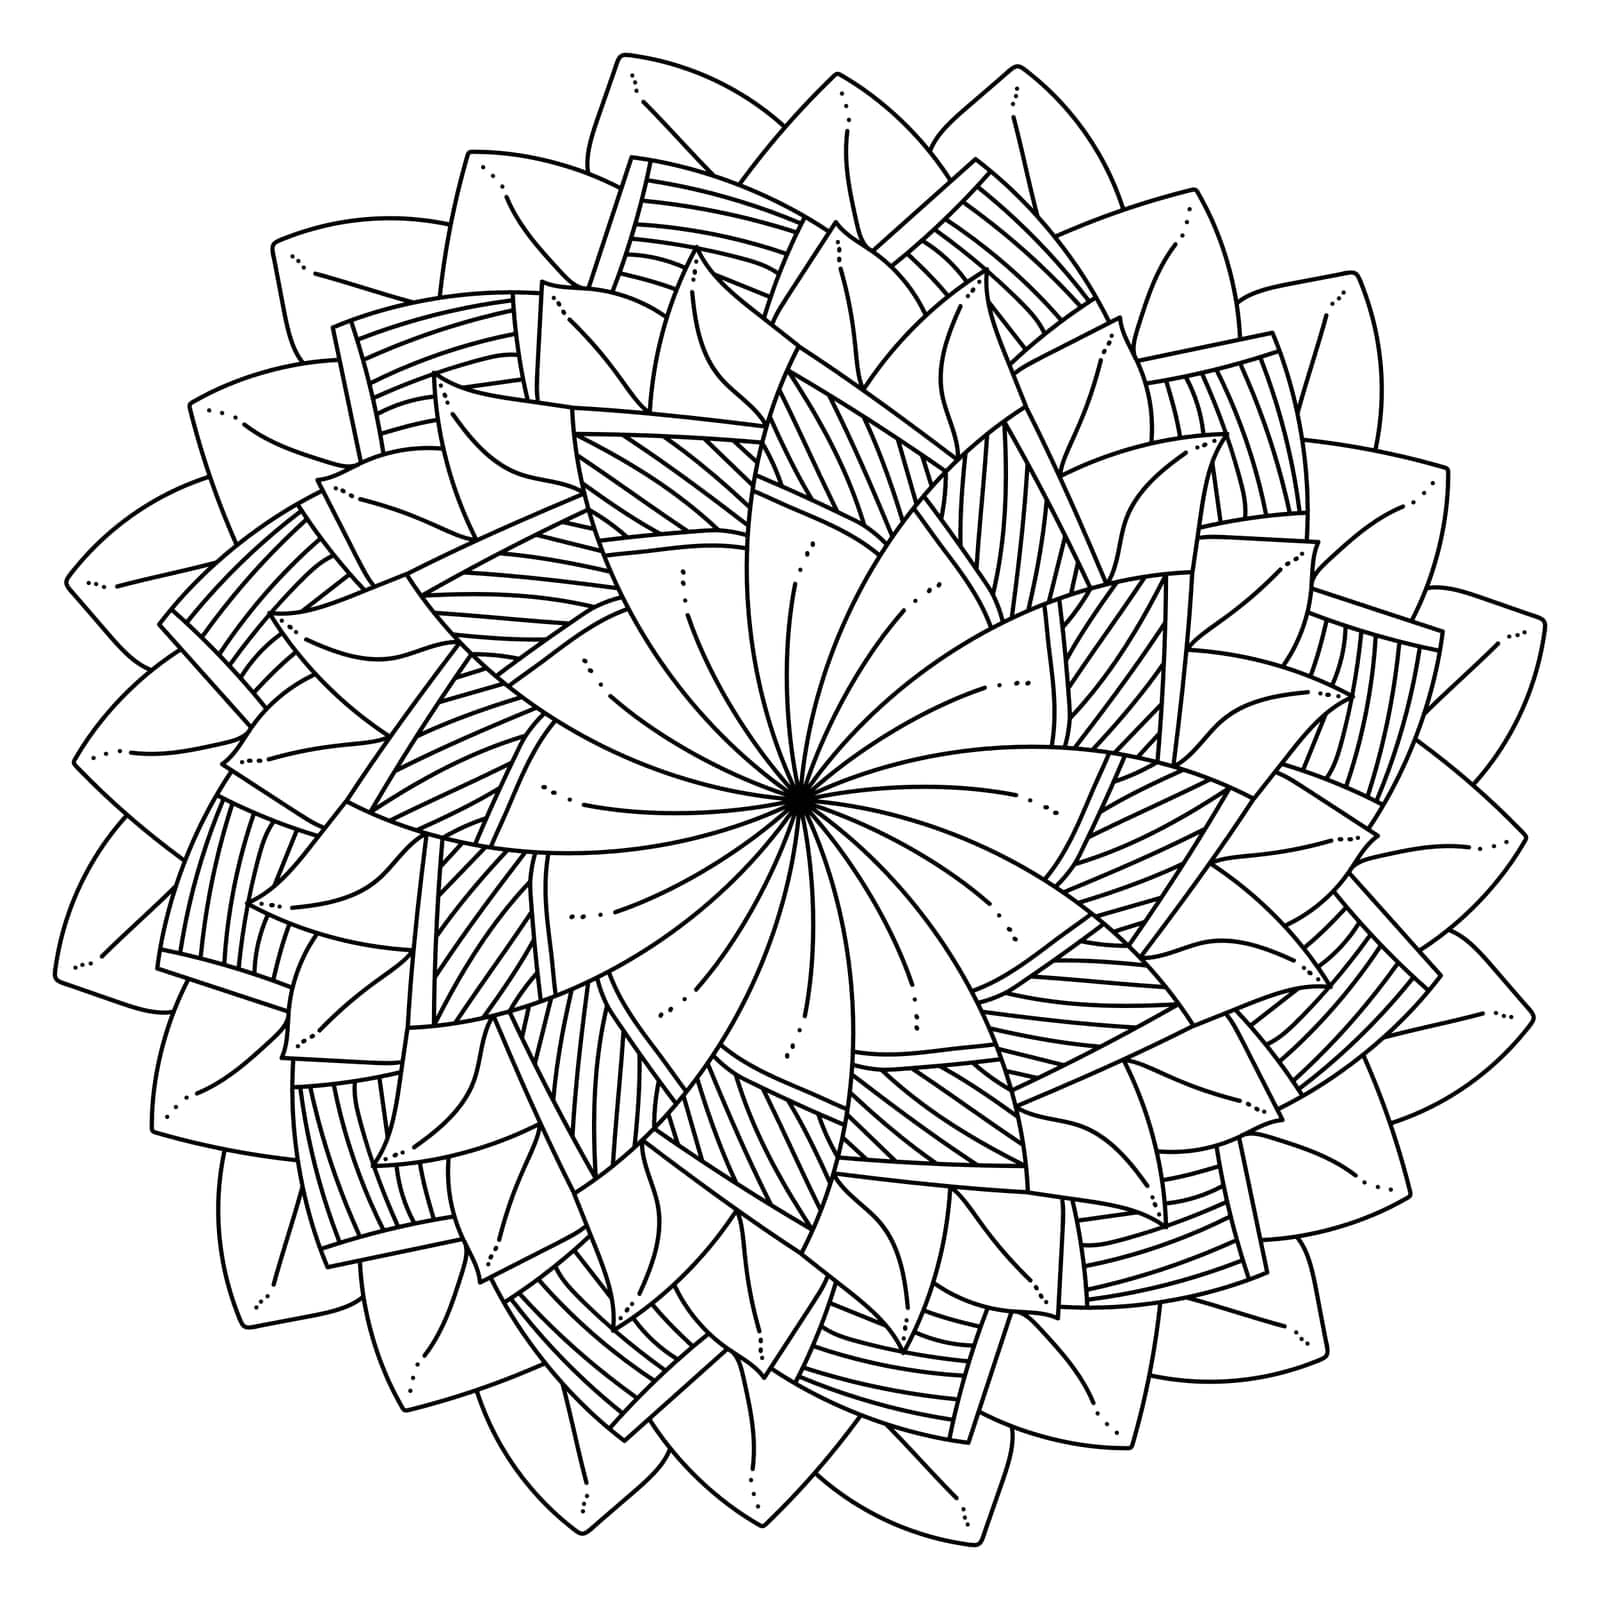 Abstract mandala contour with striped petals, meditative coloring page for creativity vector illustration